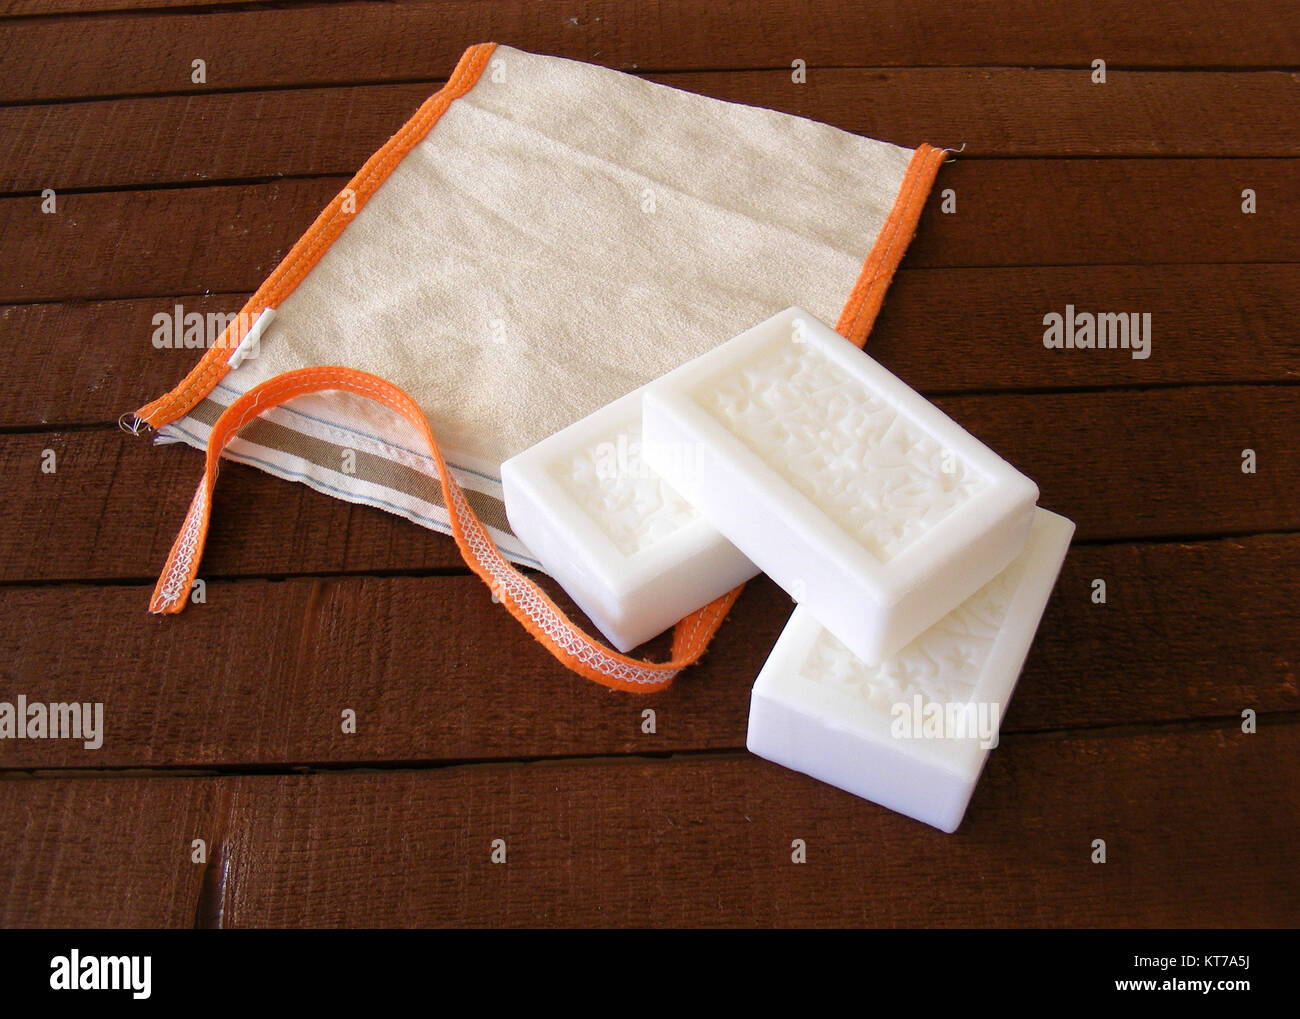 Purse for bath, white soap for bath, purse to remove dirt, turkish bath, pouch,Bathing and cleaning, pouch throwing, bath and pouch, massage Stock Photo